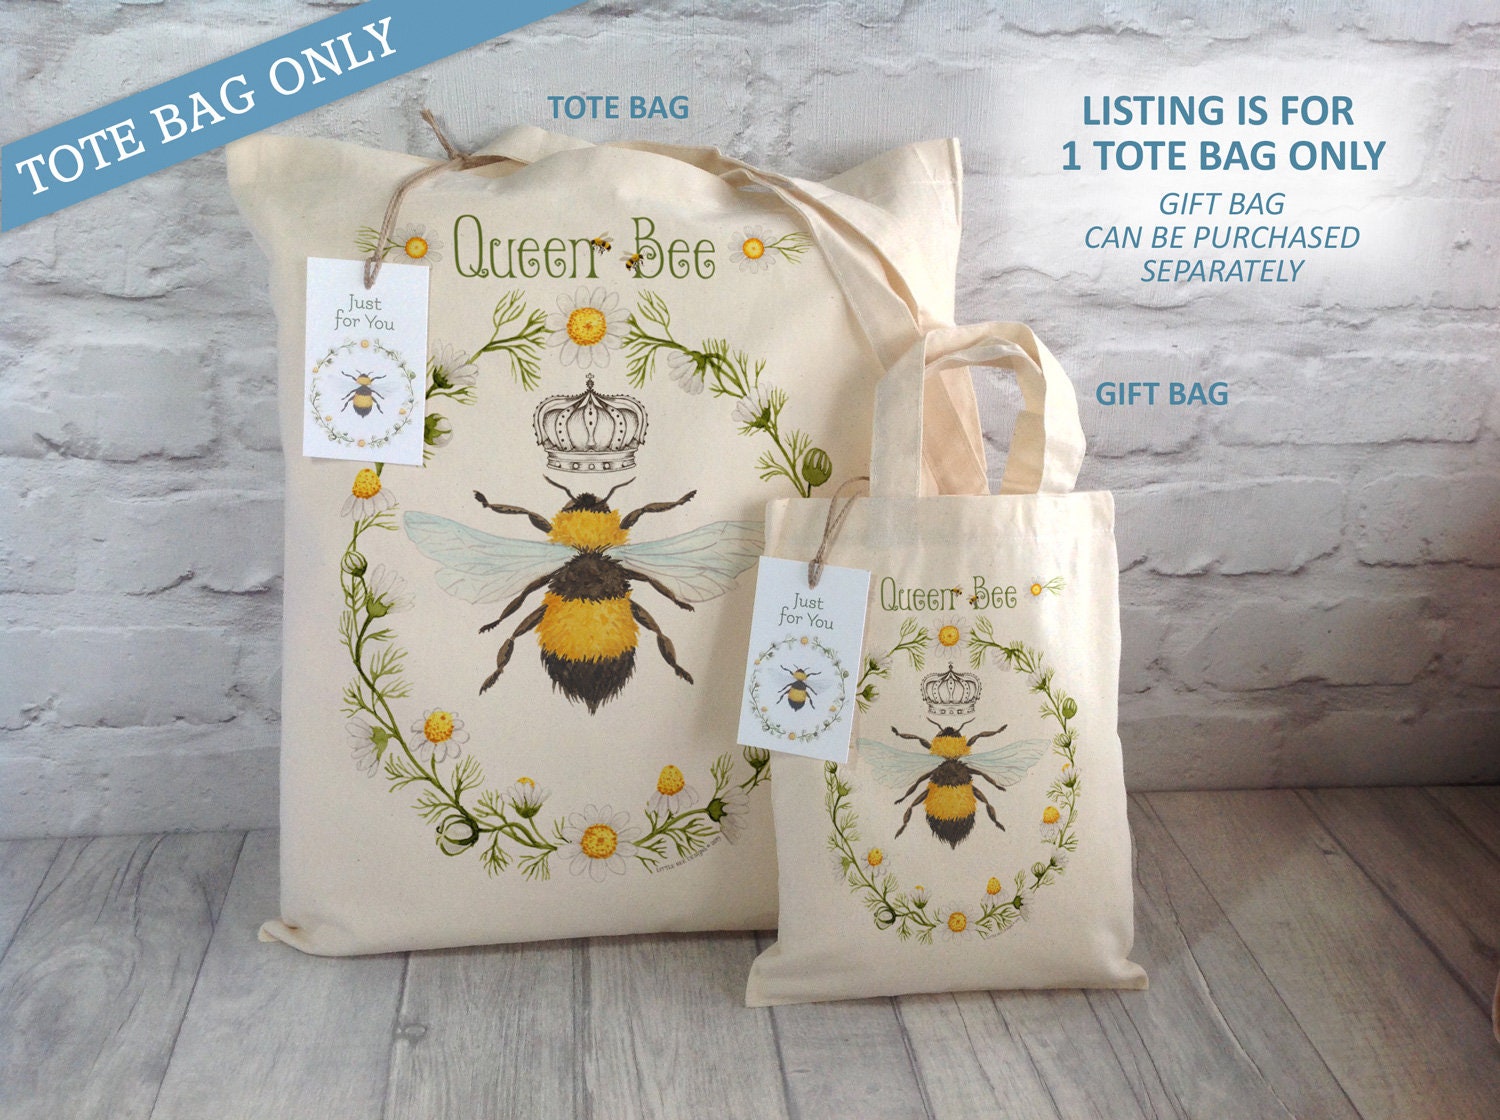 Queen Bee Tote Shopping Bag Beekeeper gift | Etsy